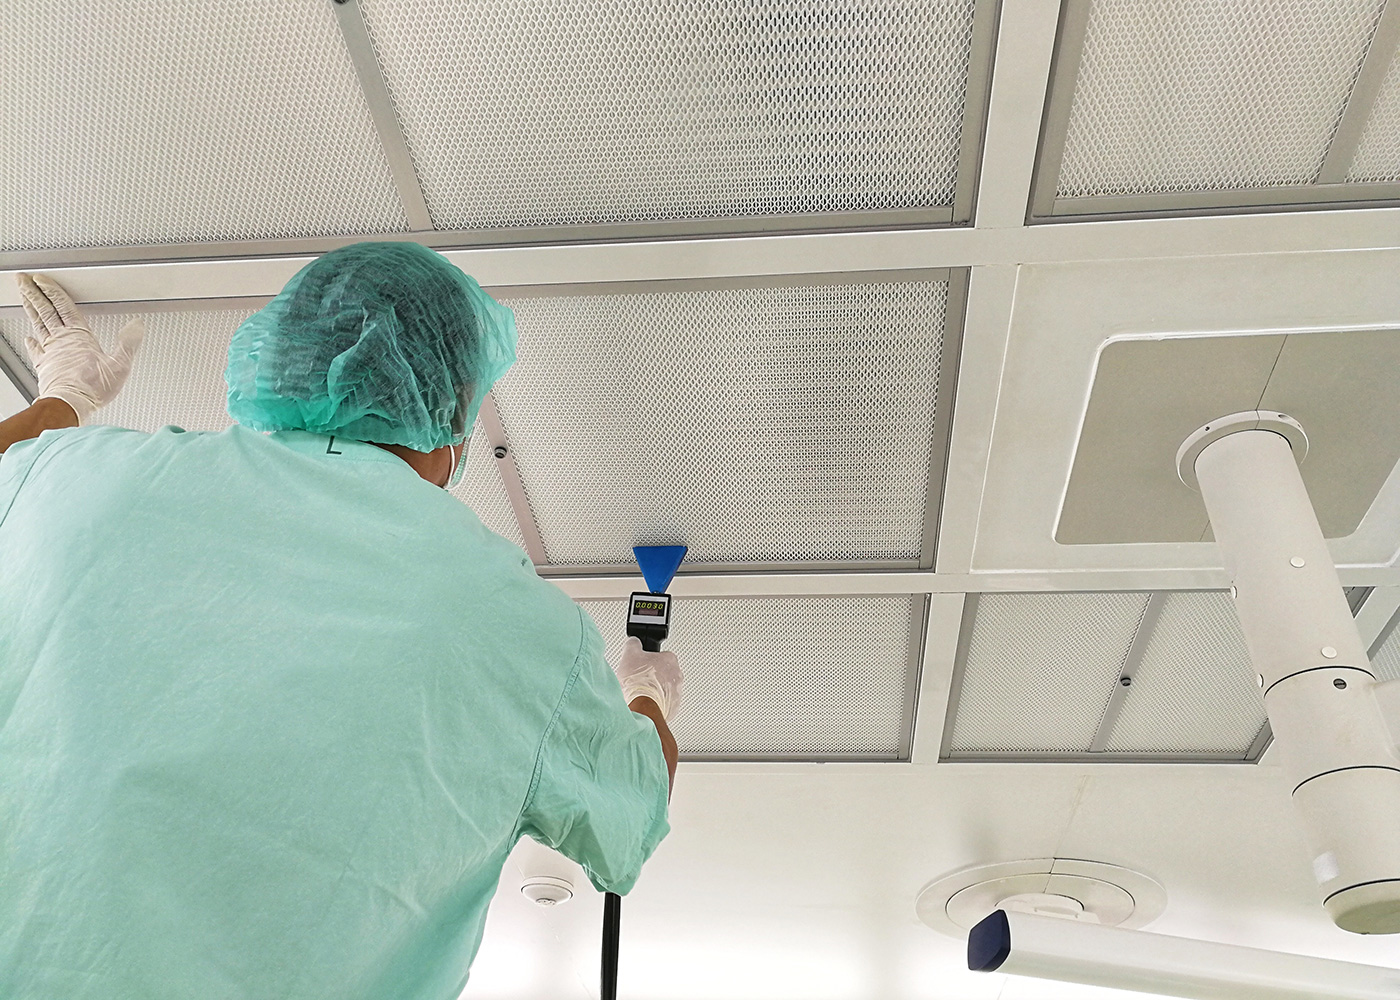 A technician scans and tests the filter performance in the ceiling of a cleanroom